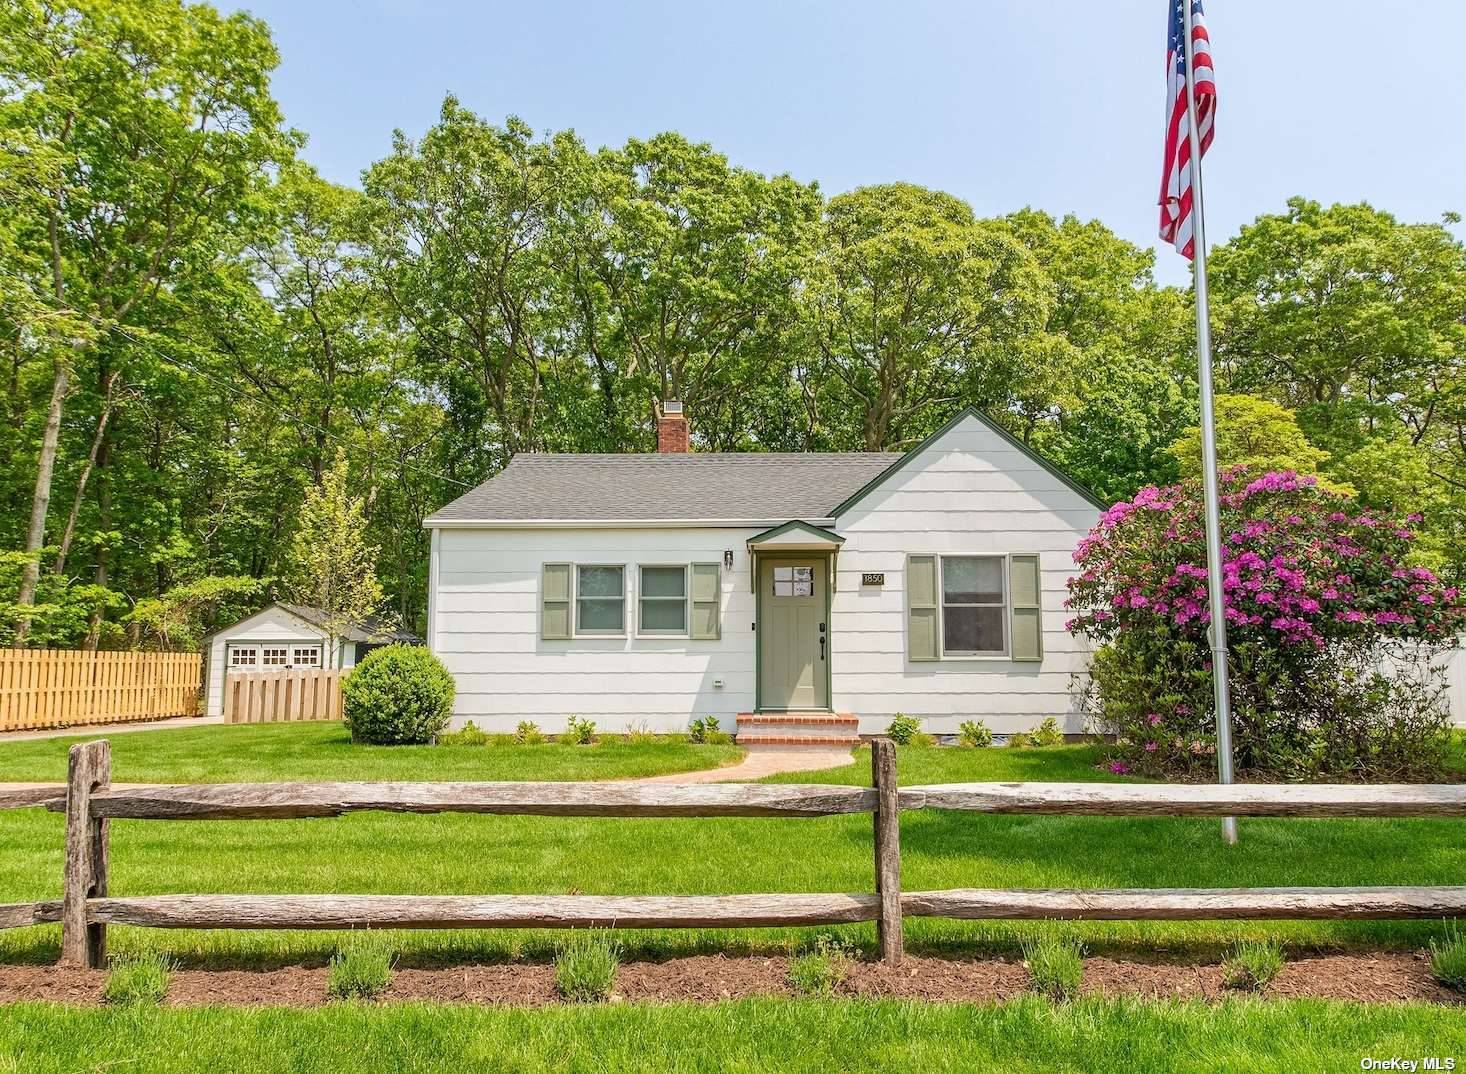 Newly renovated three bedroom, two bath bungalow just outside of popular Greenport Village.